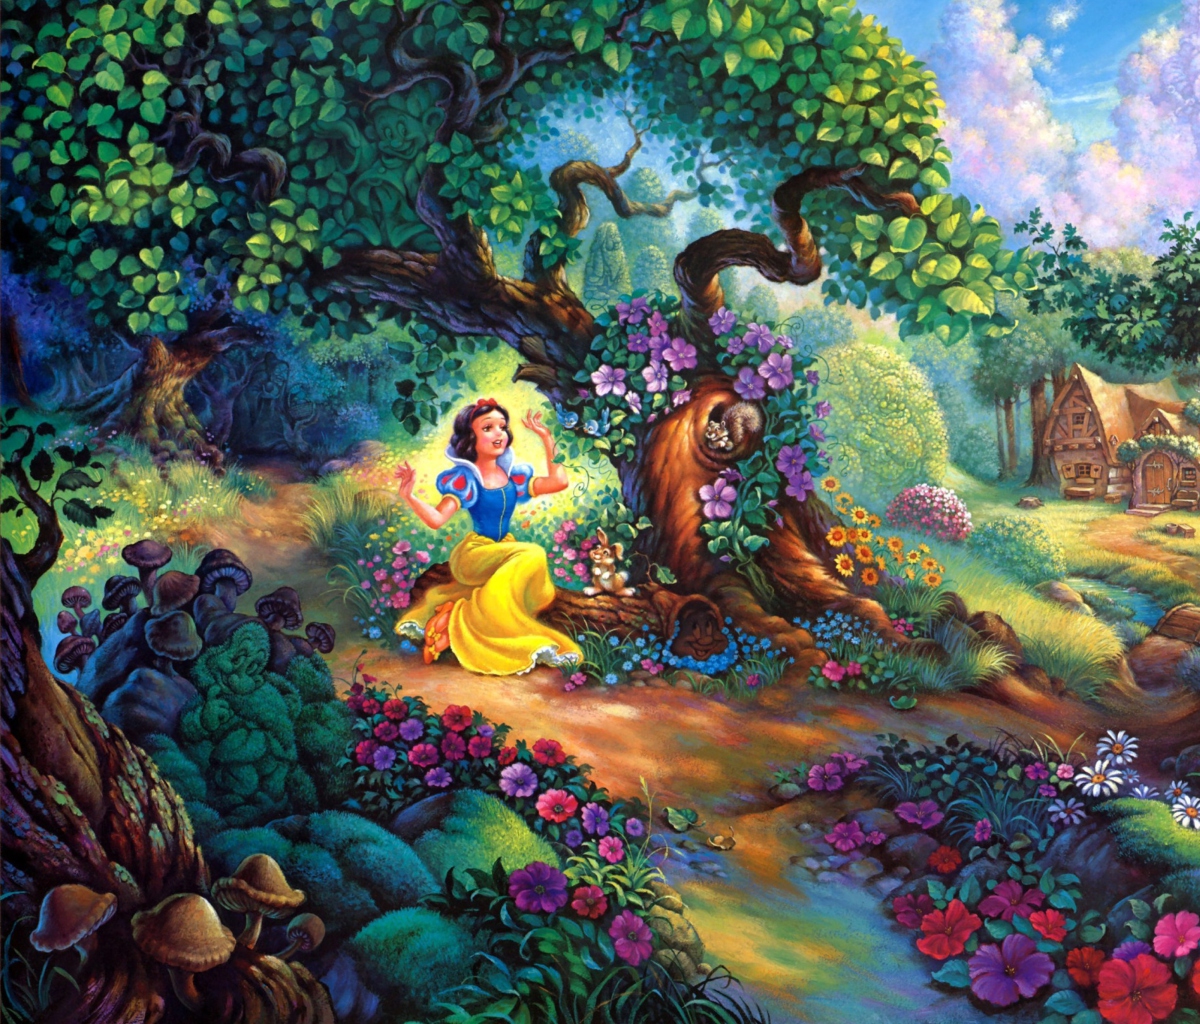 Snow White In Magical Forest wallpaper 1200x1024